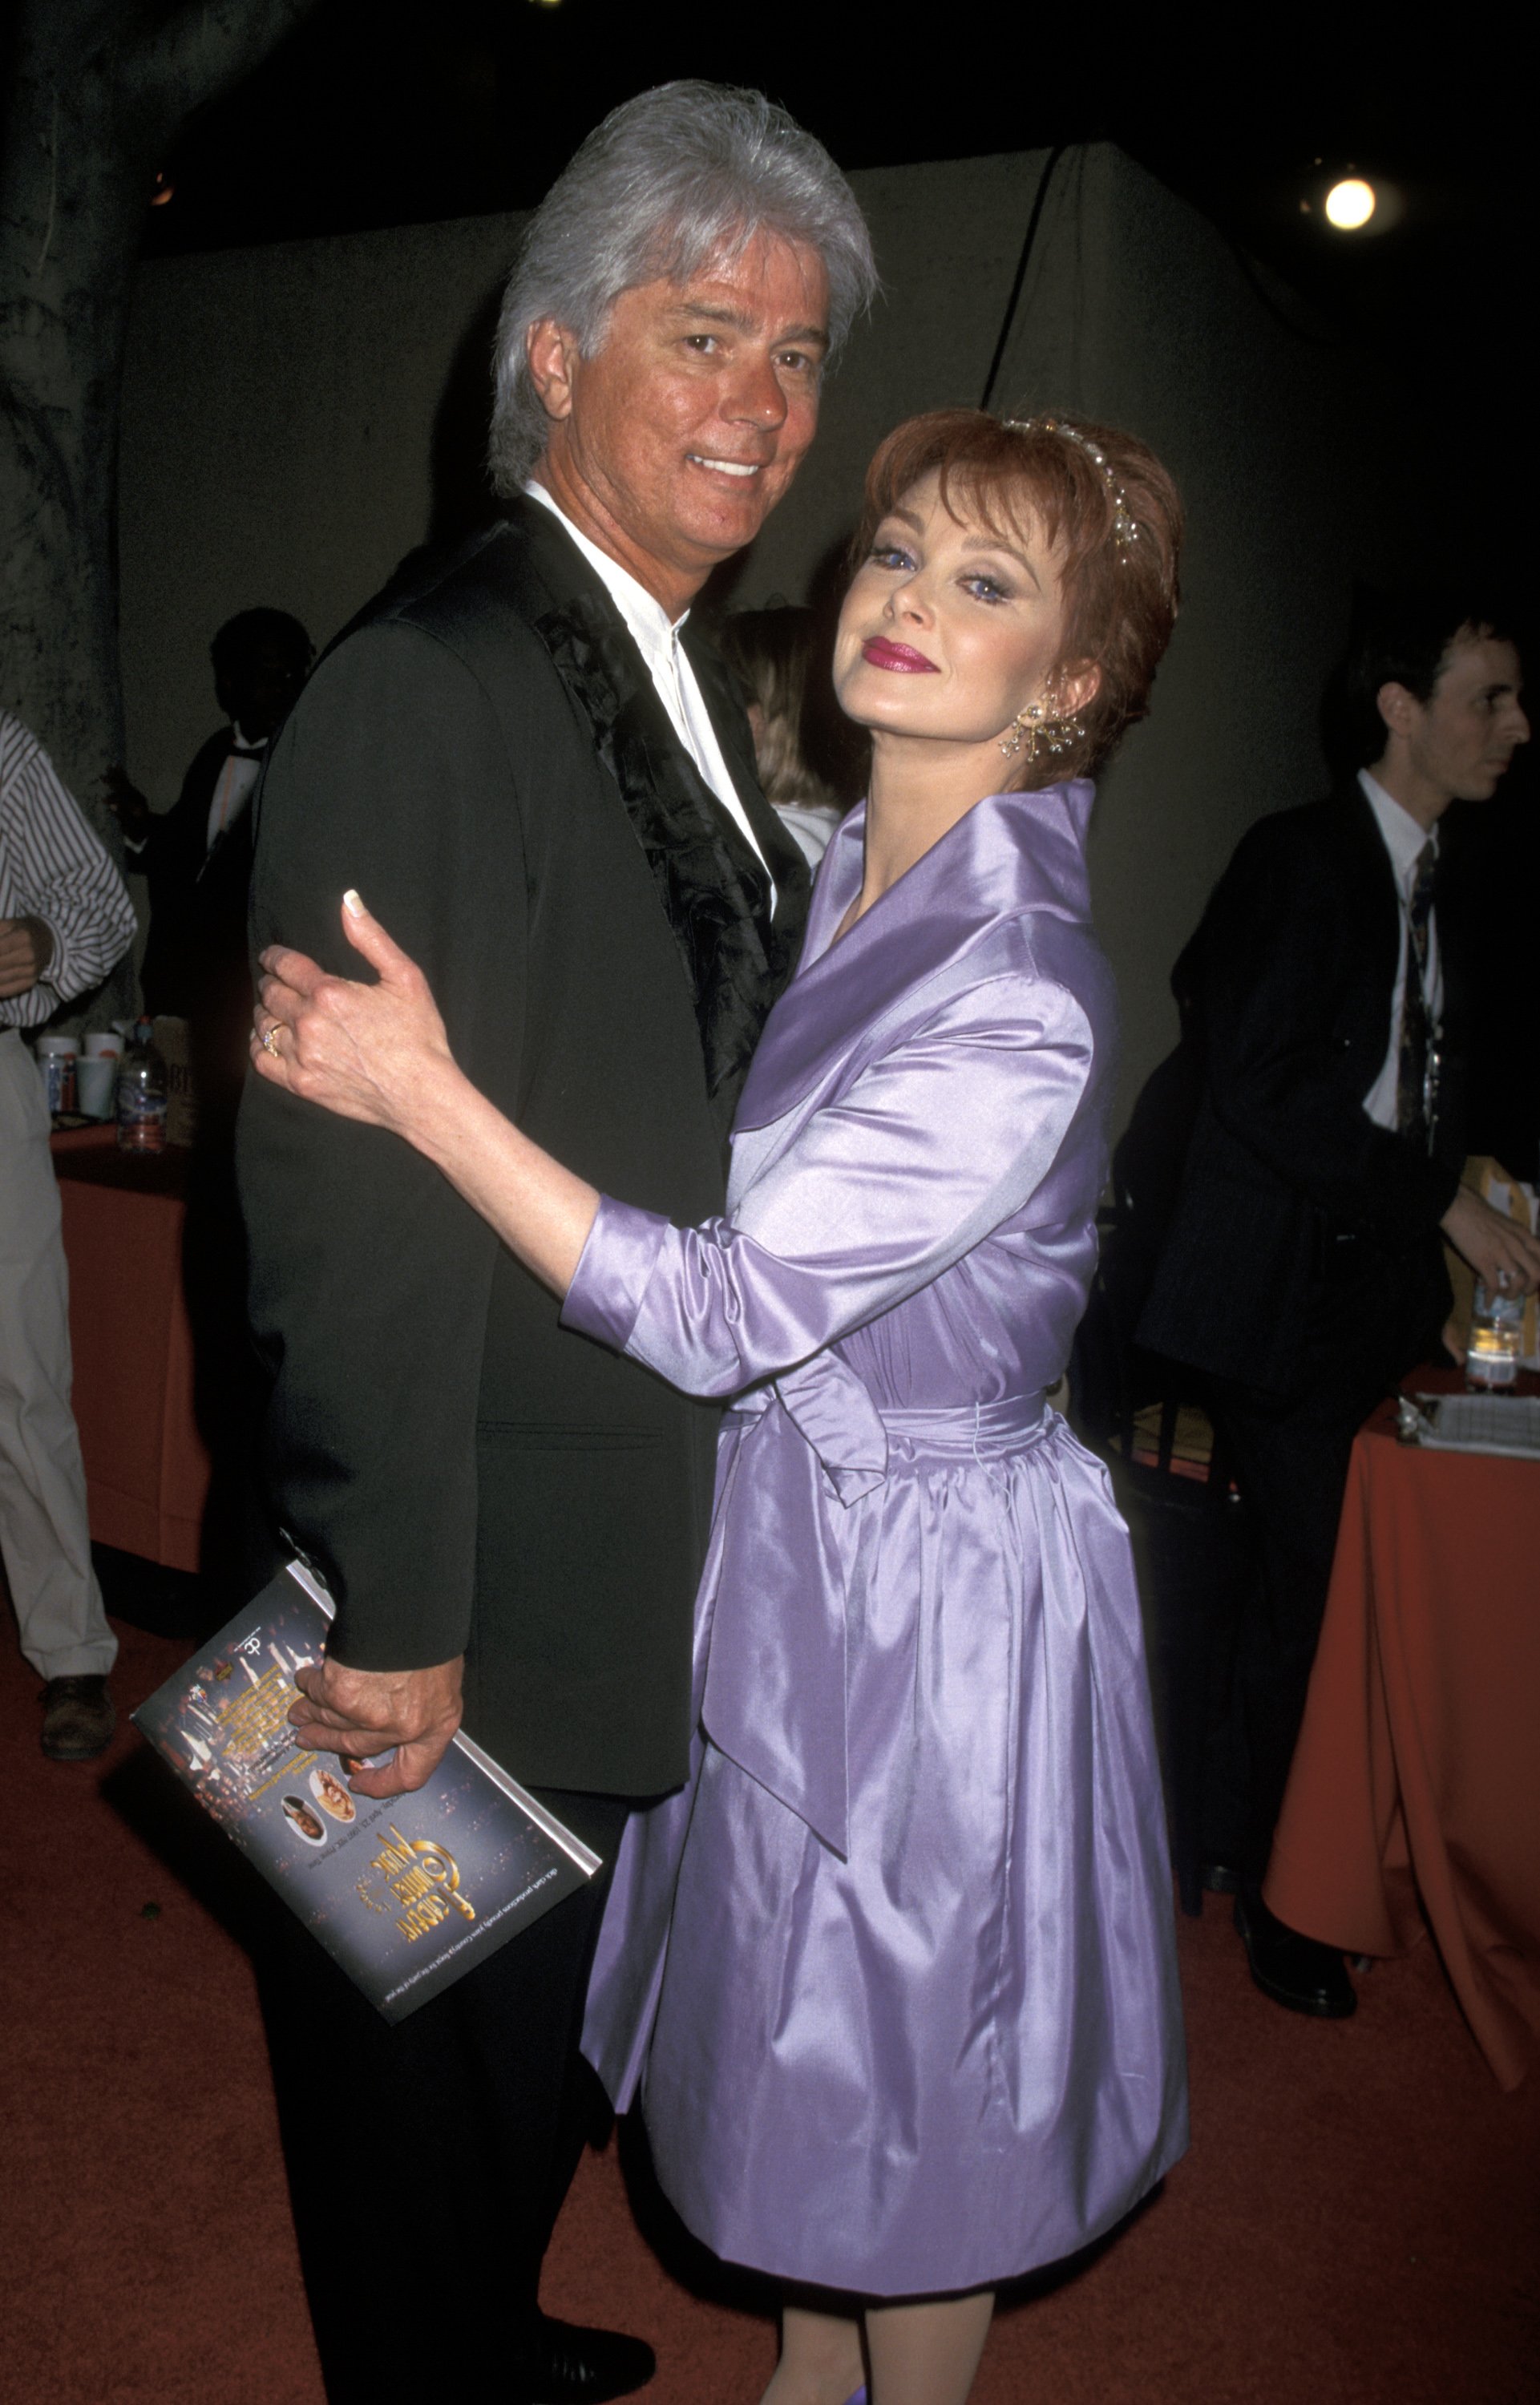 Larry Strickland and Naomi Judd during the 32nd Annual Academy of Country Music Awards in Universal City, California, on April 23, 1997. | Source: Jim Smeal/Ron Galella Collection/Images